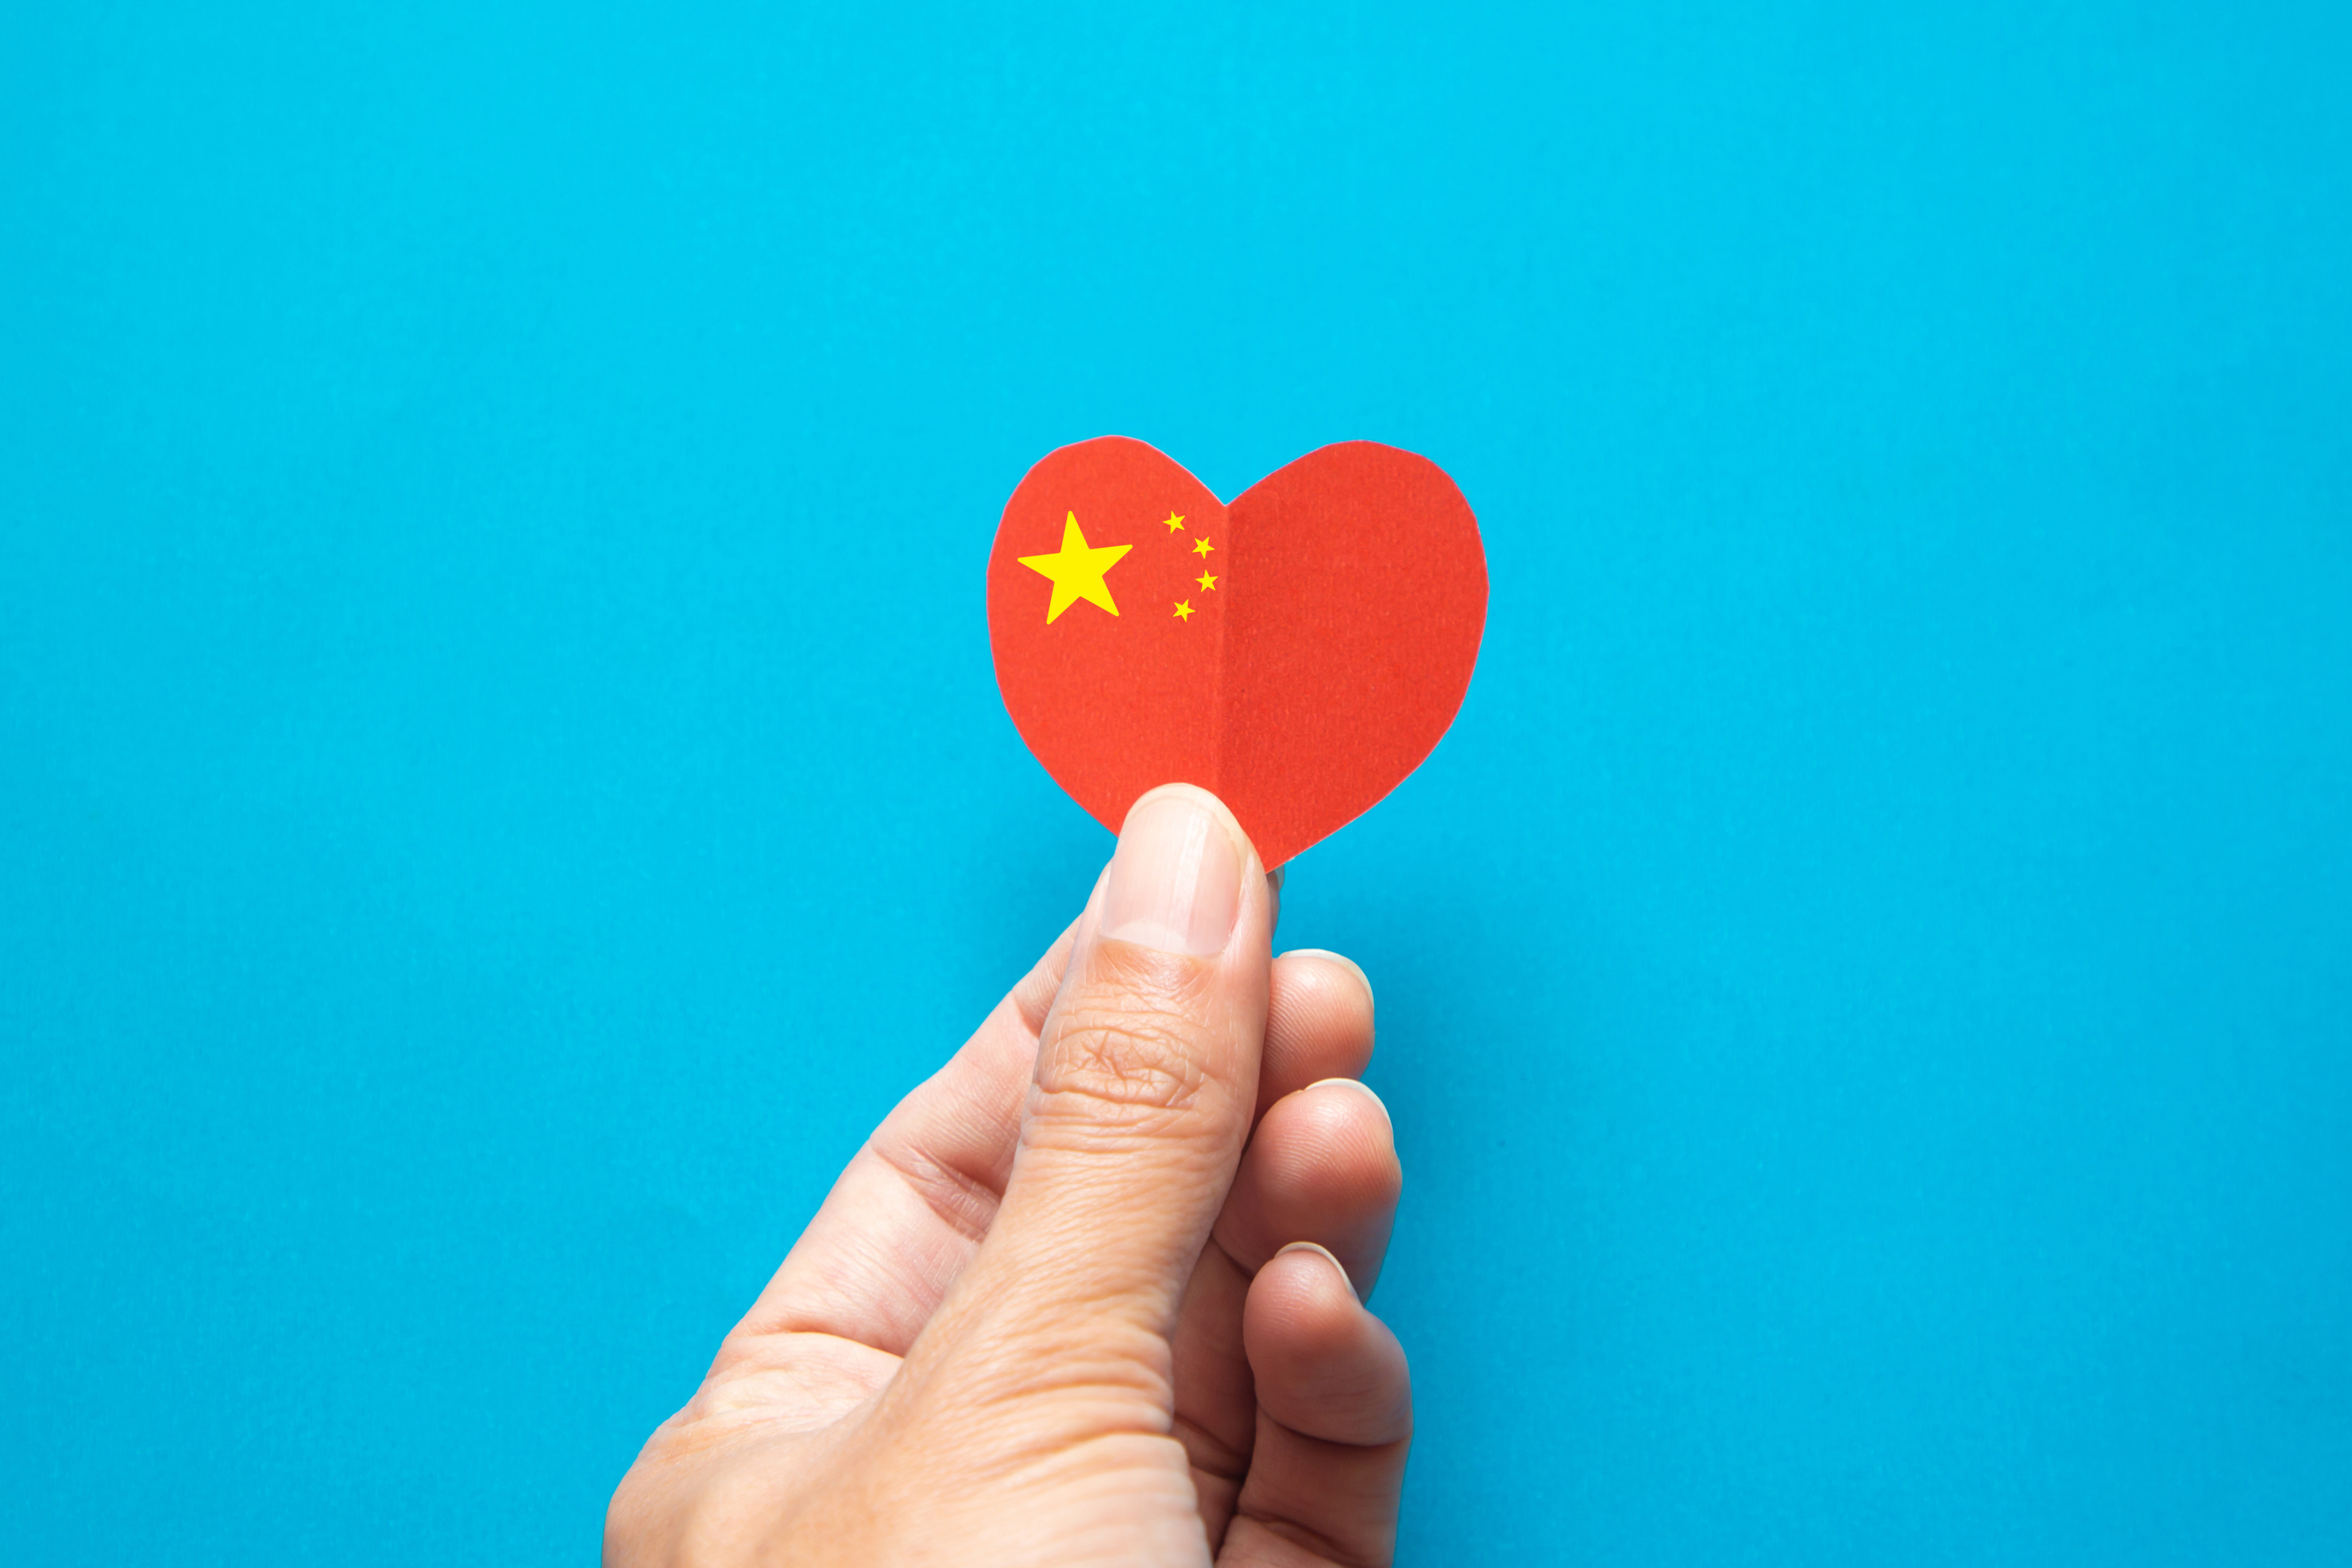  Beijing has attempted to make better use of charity to improve social equality amid its “common prosperity” drive. Photo: Shutterstock Images